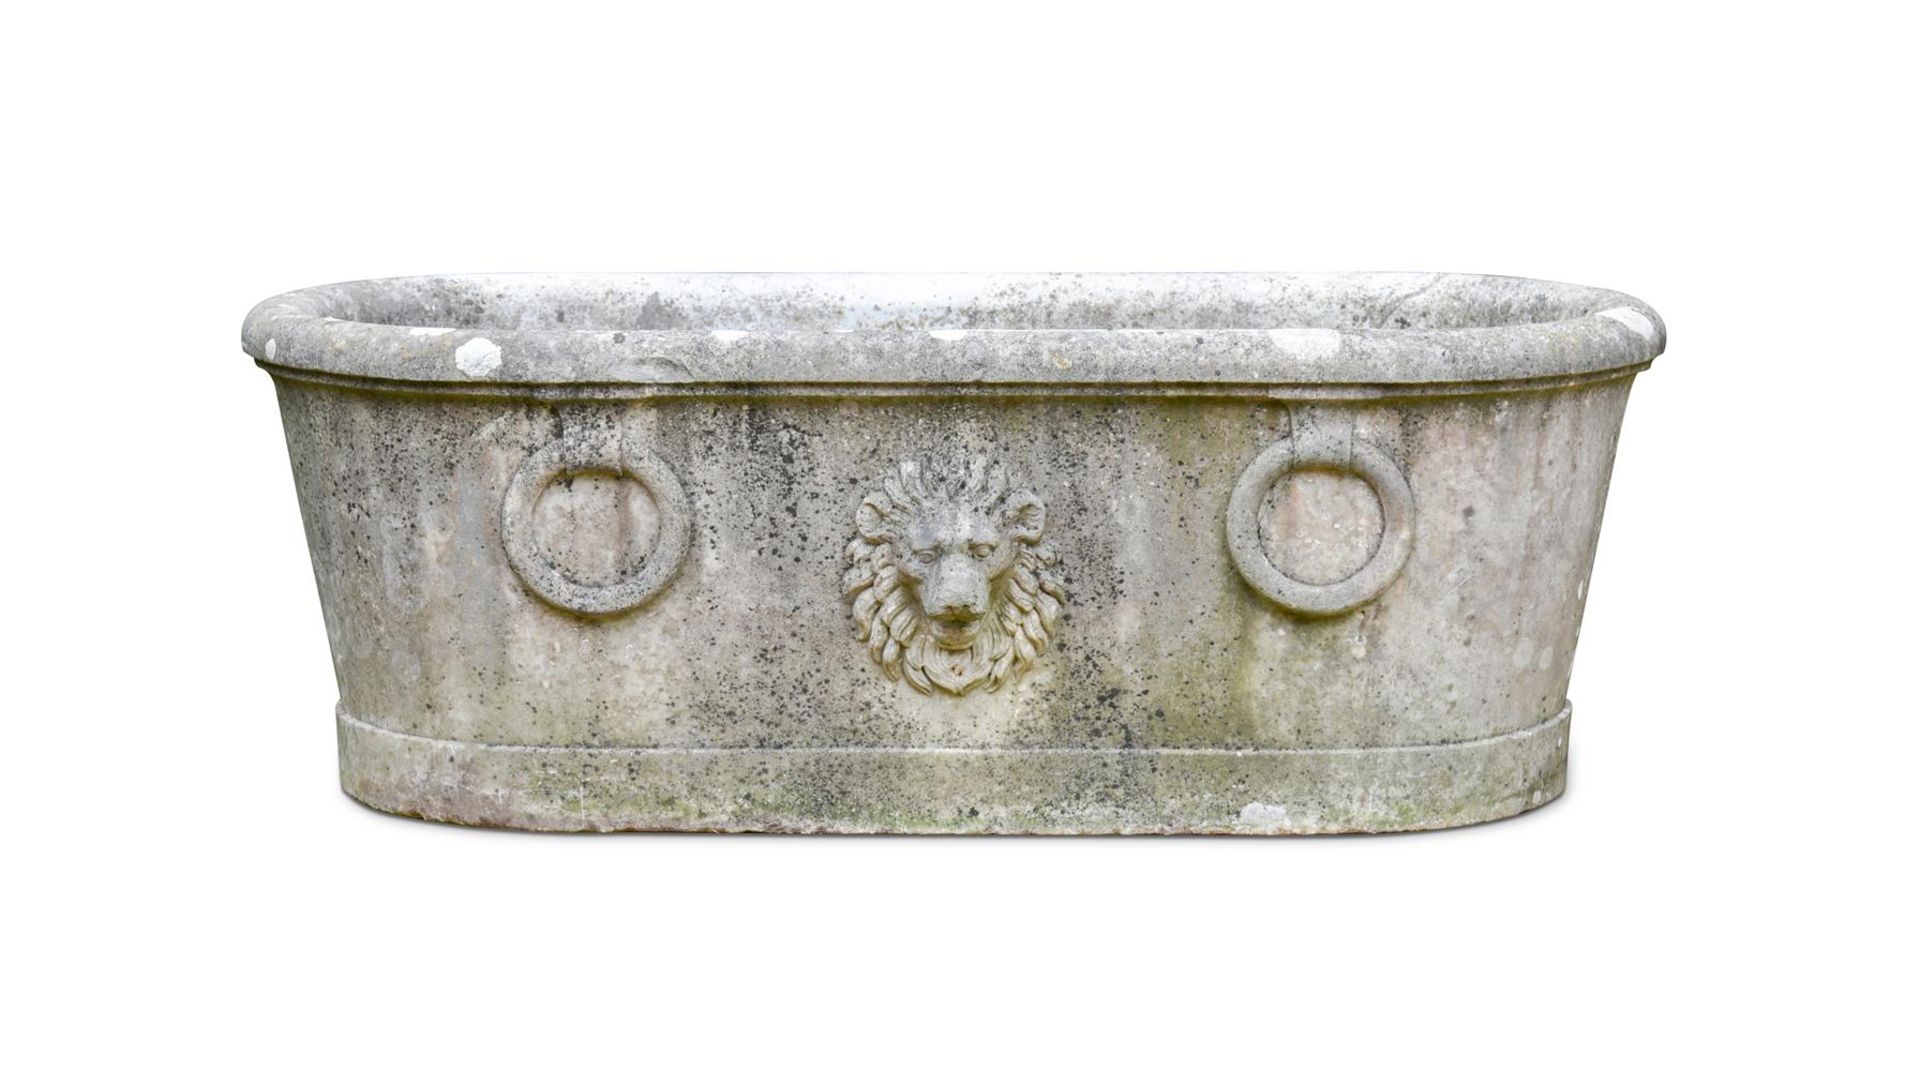 A MARBLE BATH IN THE MANNER OF A ROMAN LABRUM, PROBABLY 19TH CENTURY